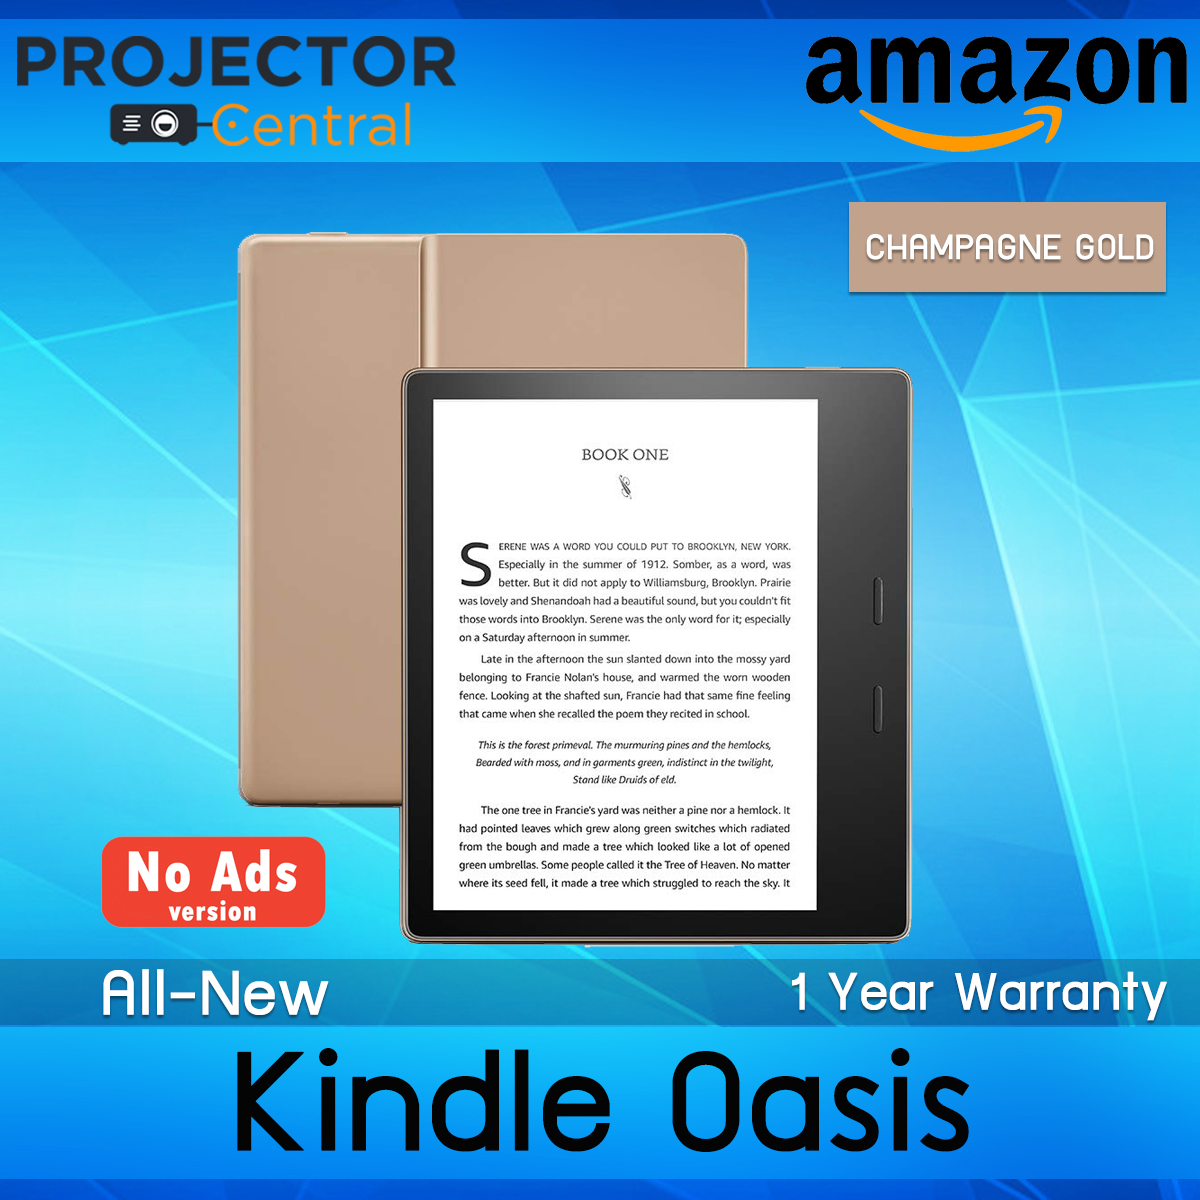 Amazon Kindle Oasis E-reader 2019 , 7 High-Resolution Display (300 ppi), Waterproof, Built-In Audible, Wi-Fi or Cellular (Without Ads)